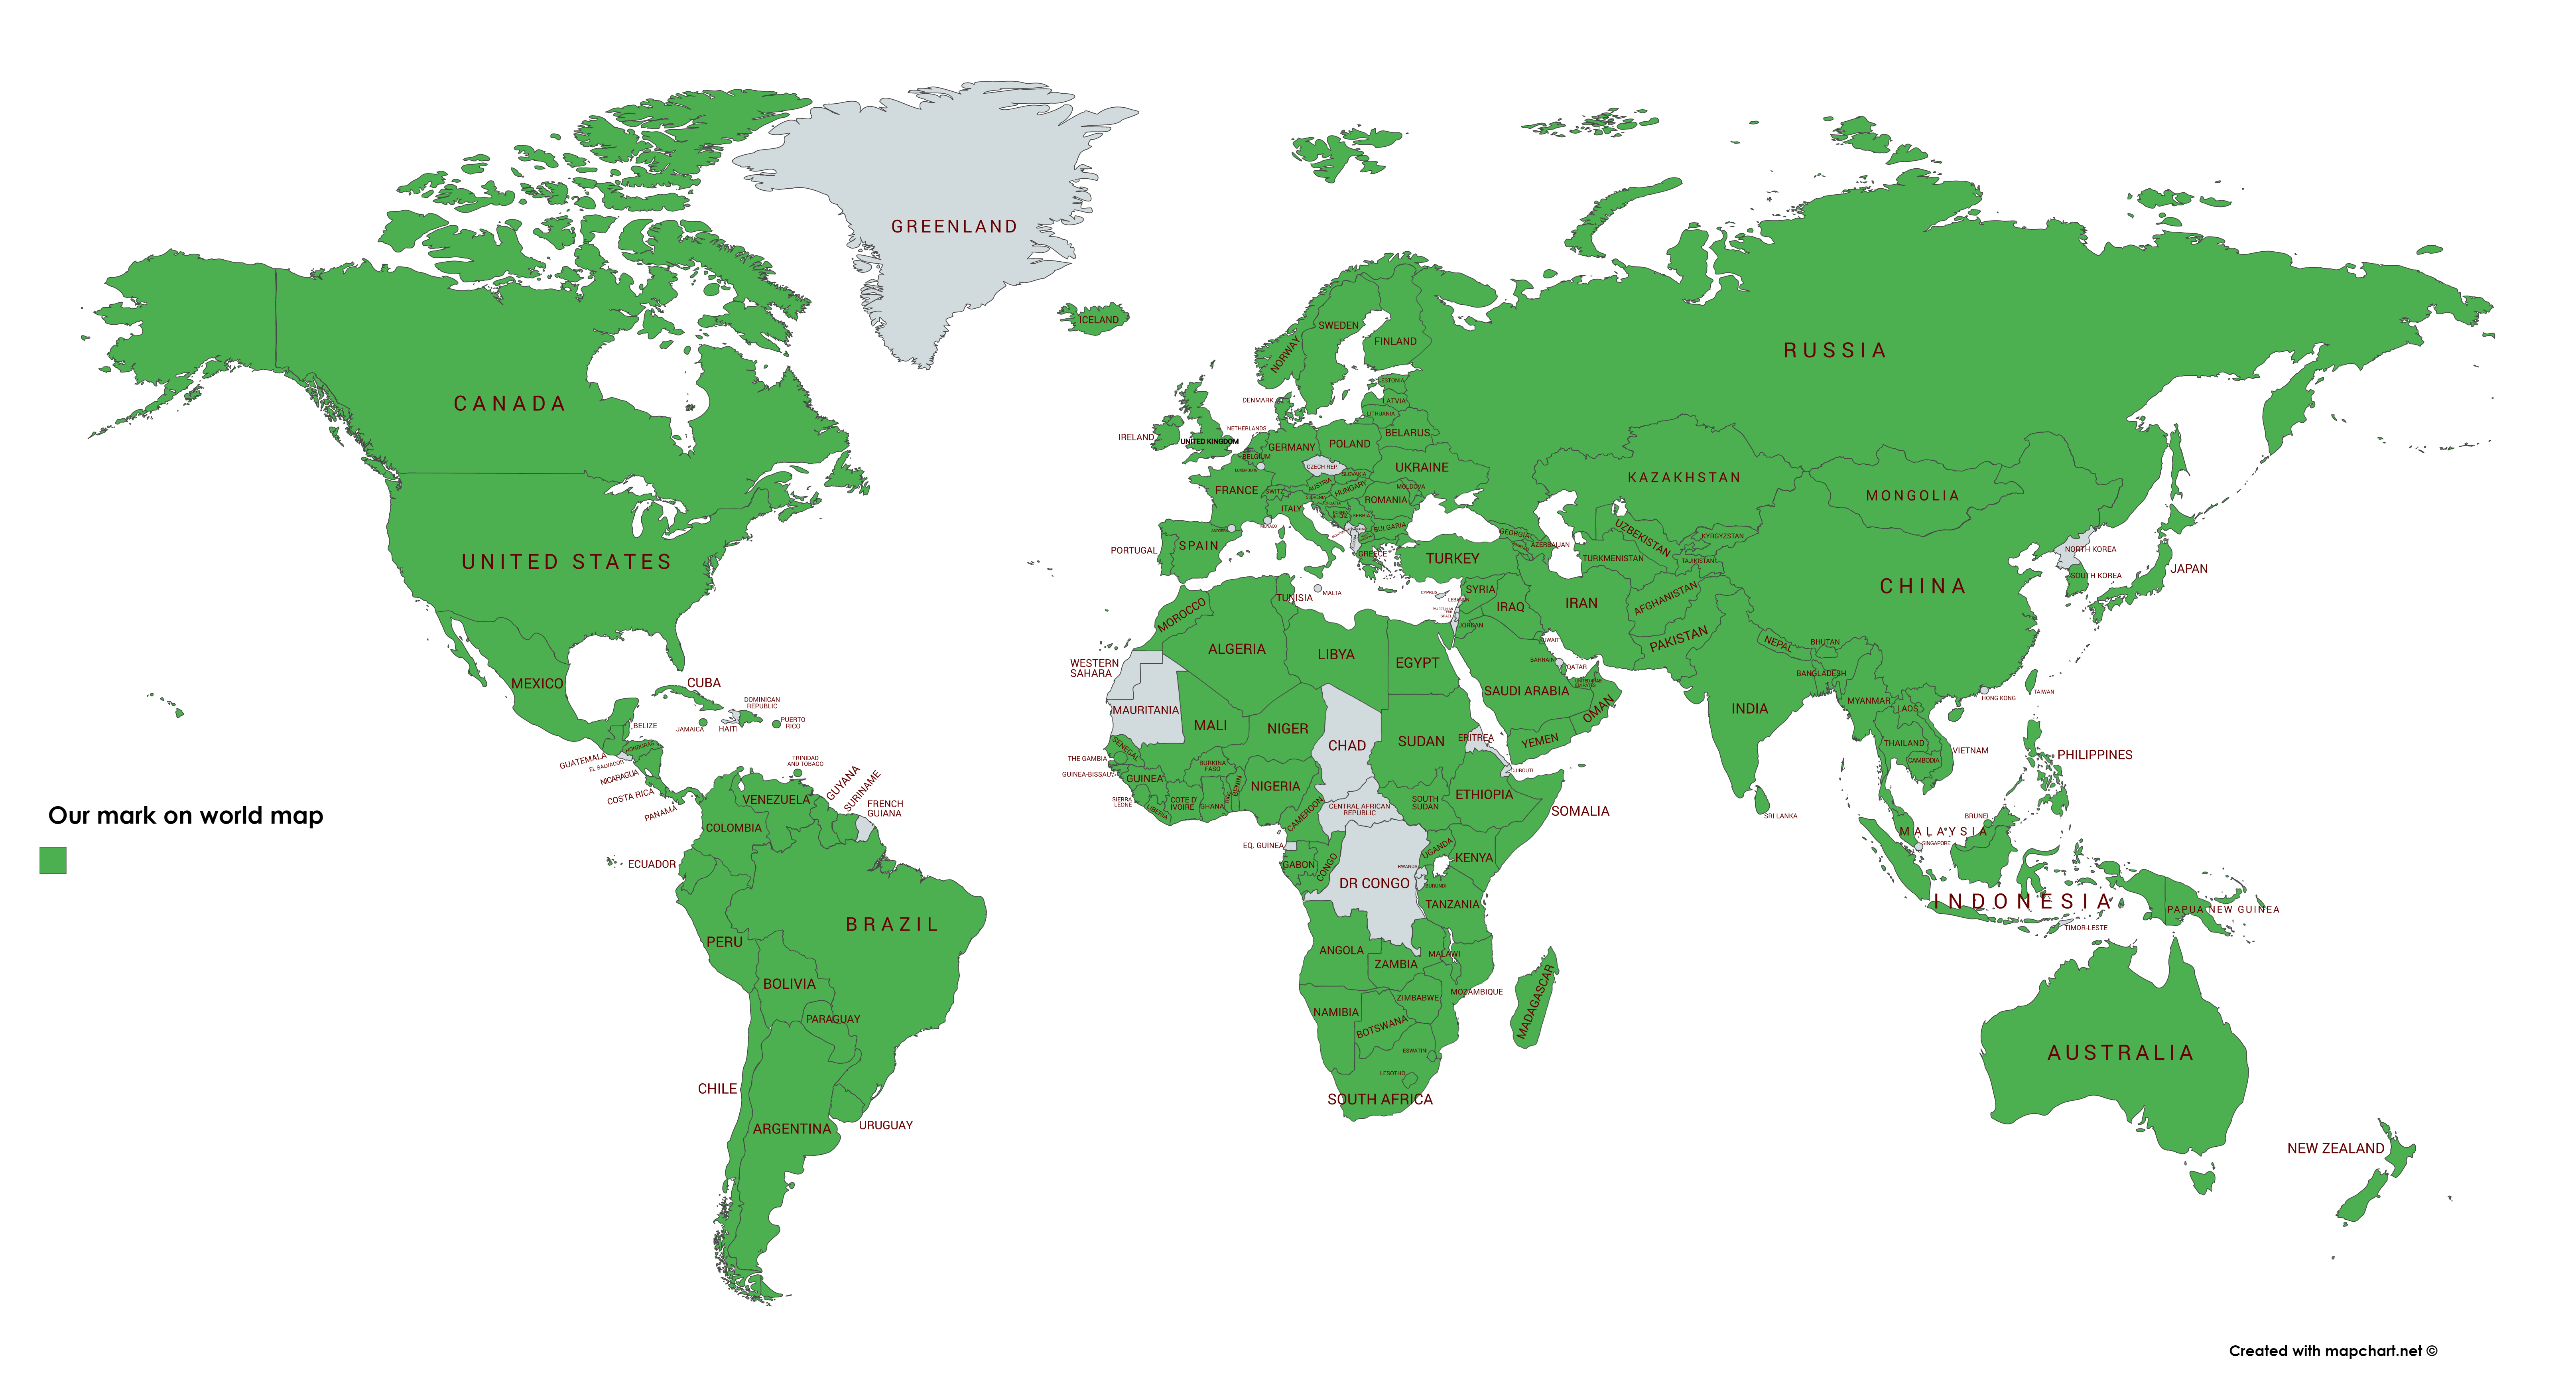 CppBuzz users globally